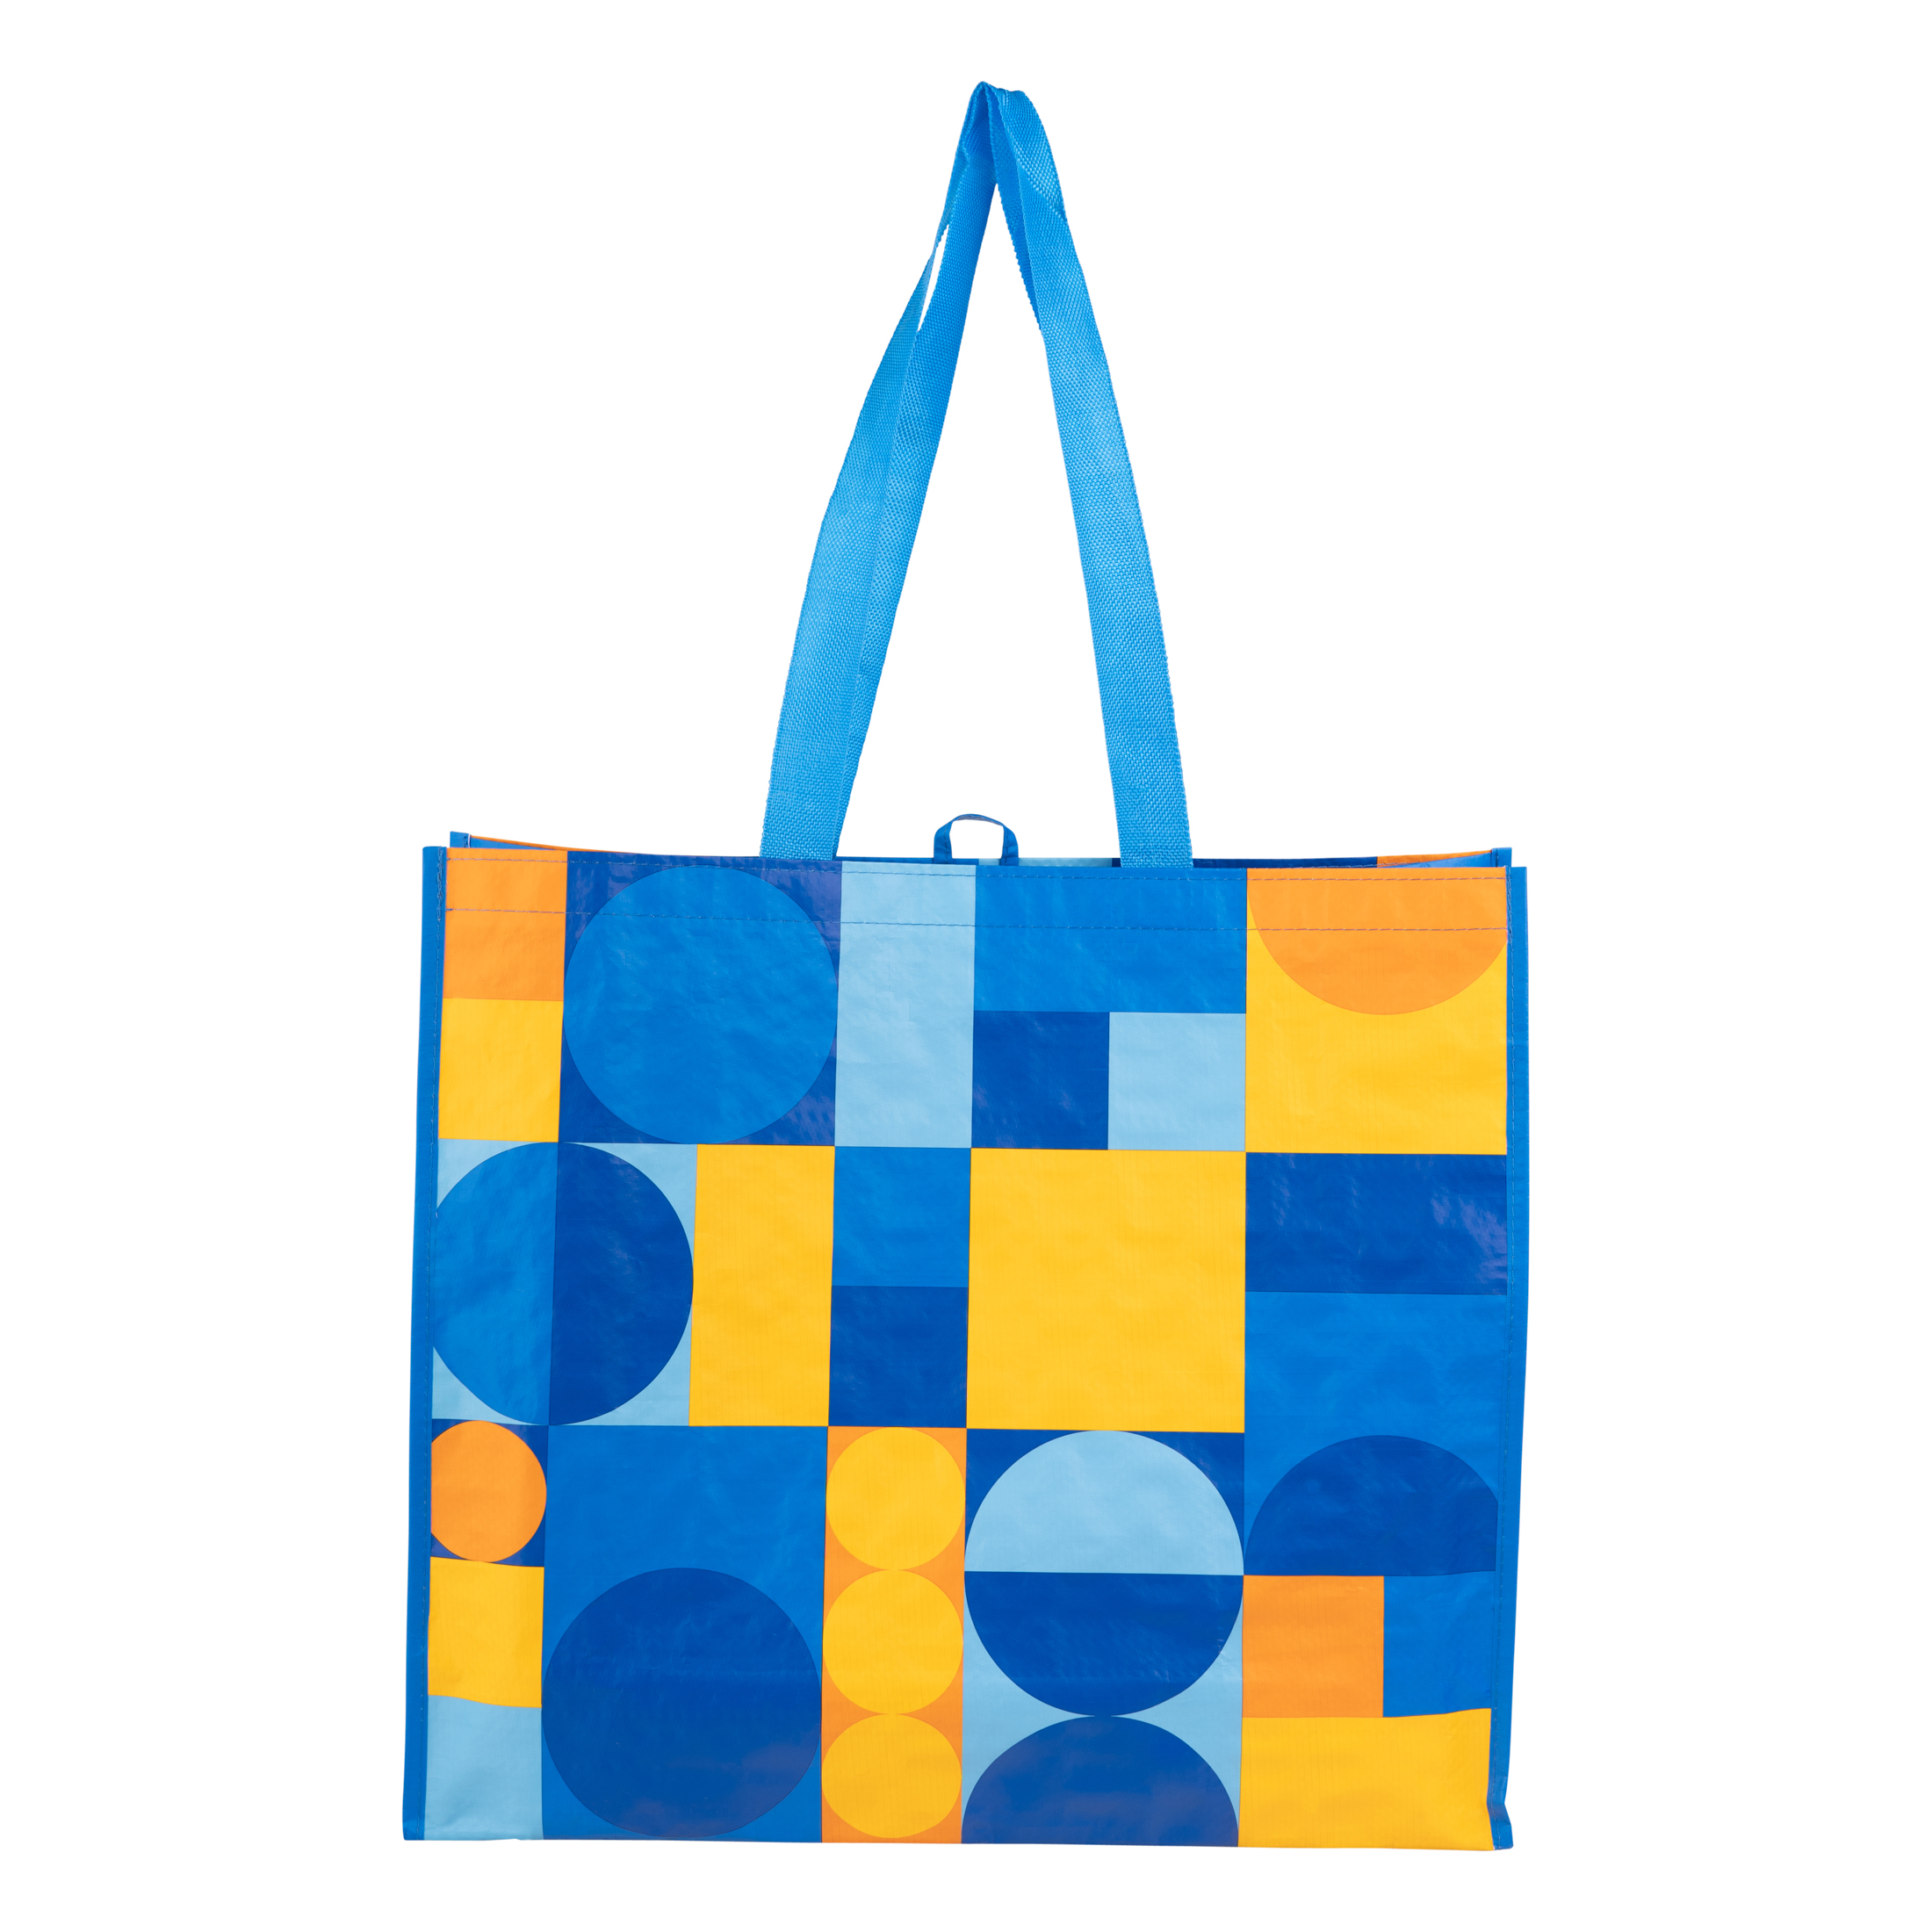 Reusable, Multi-Functional Wide Grocery Bag, Blue and Yellow Abstract Design - image 1 of 5